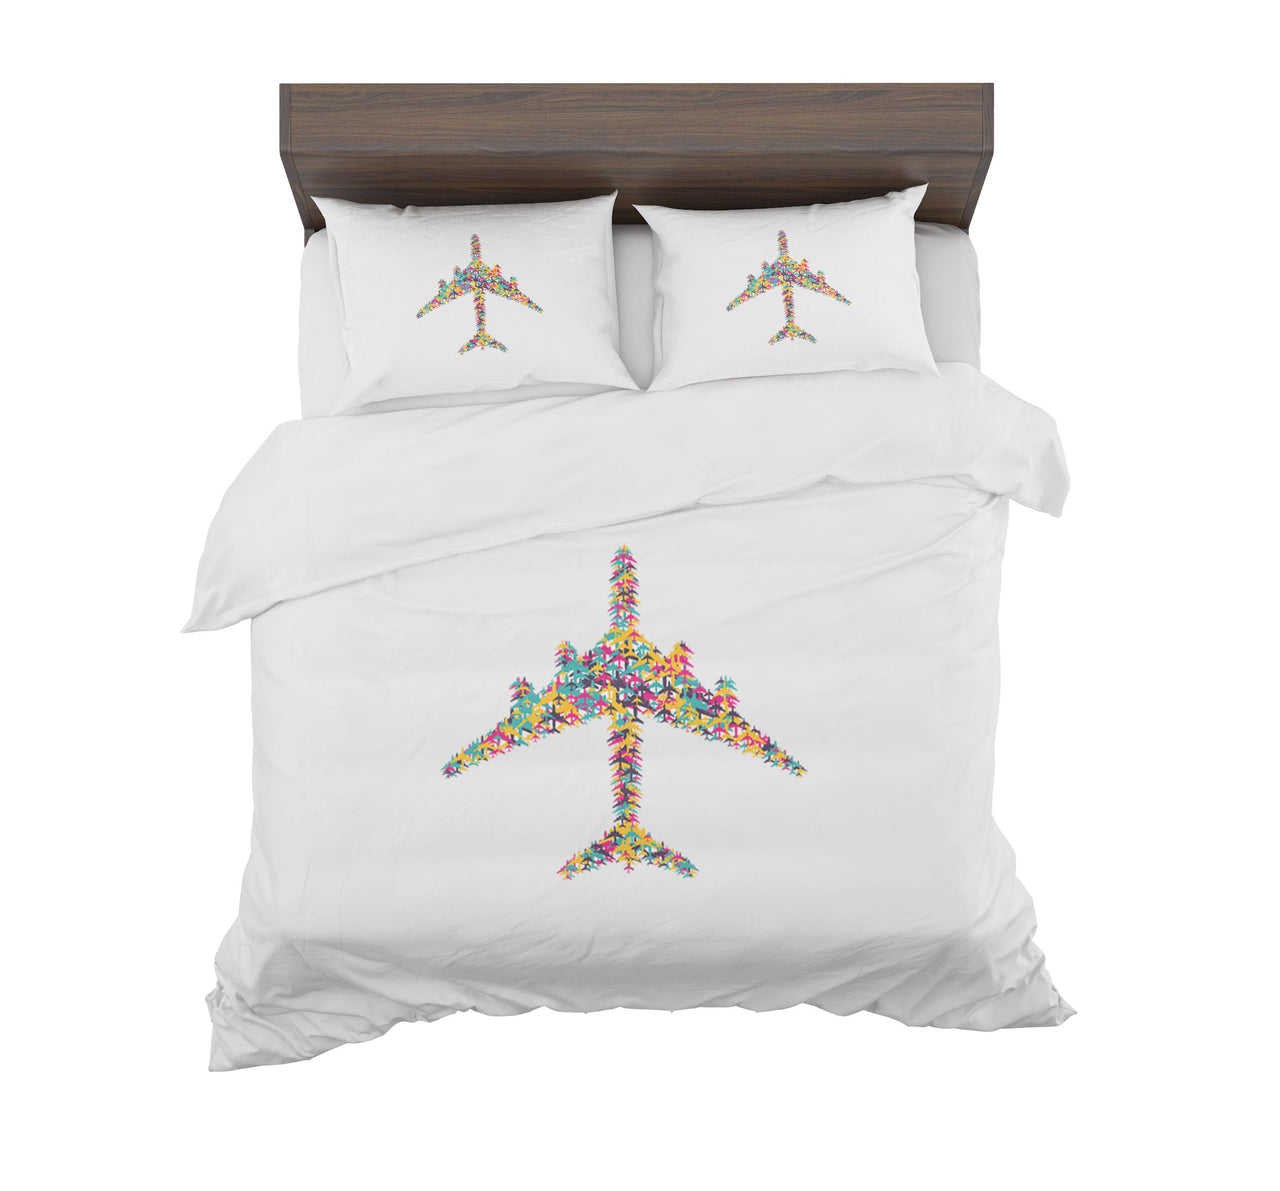 Colourful Airplane Designed Bedding Sets